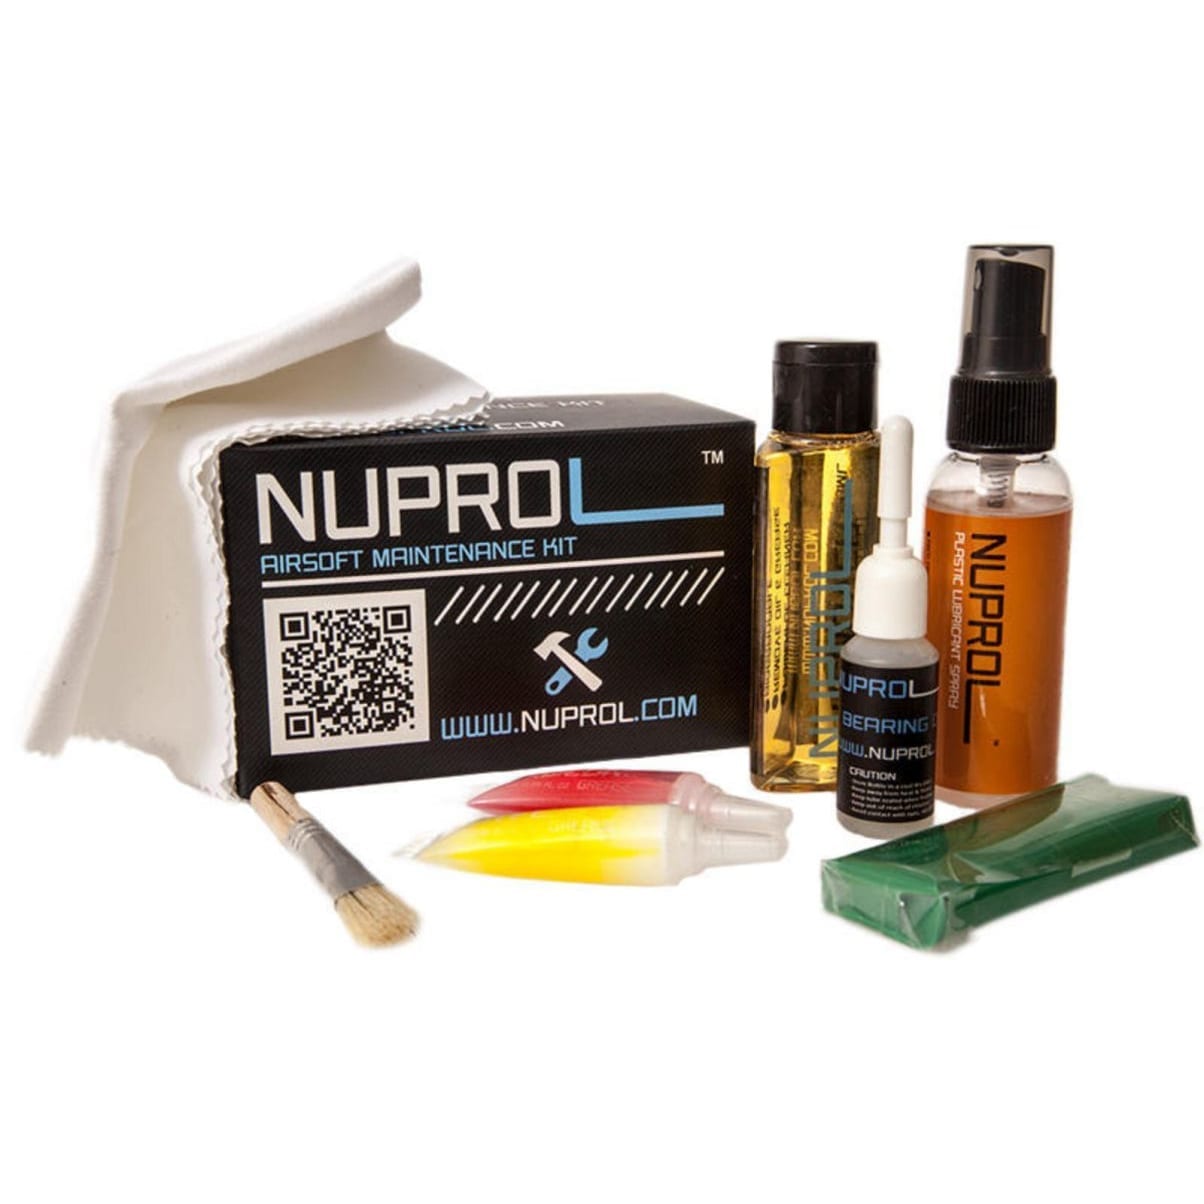 Nuprol Maintenance Kit for Airsoft Guns and Pistols